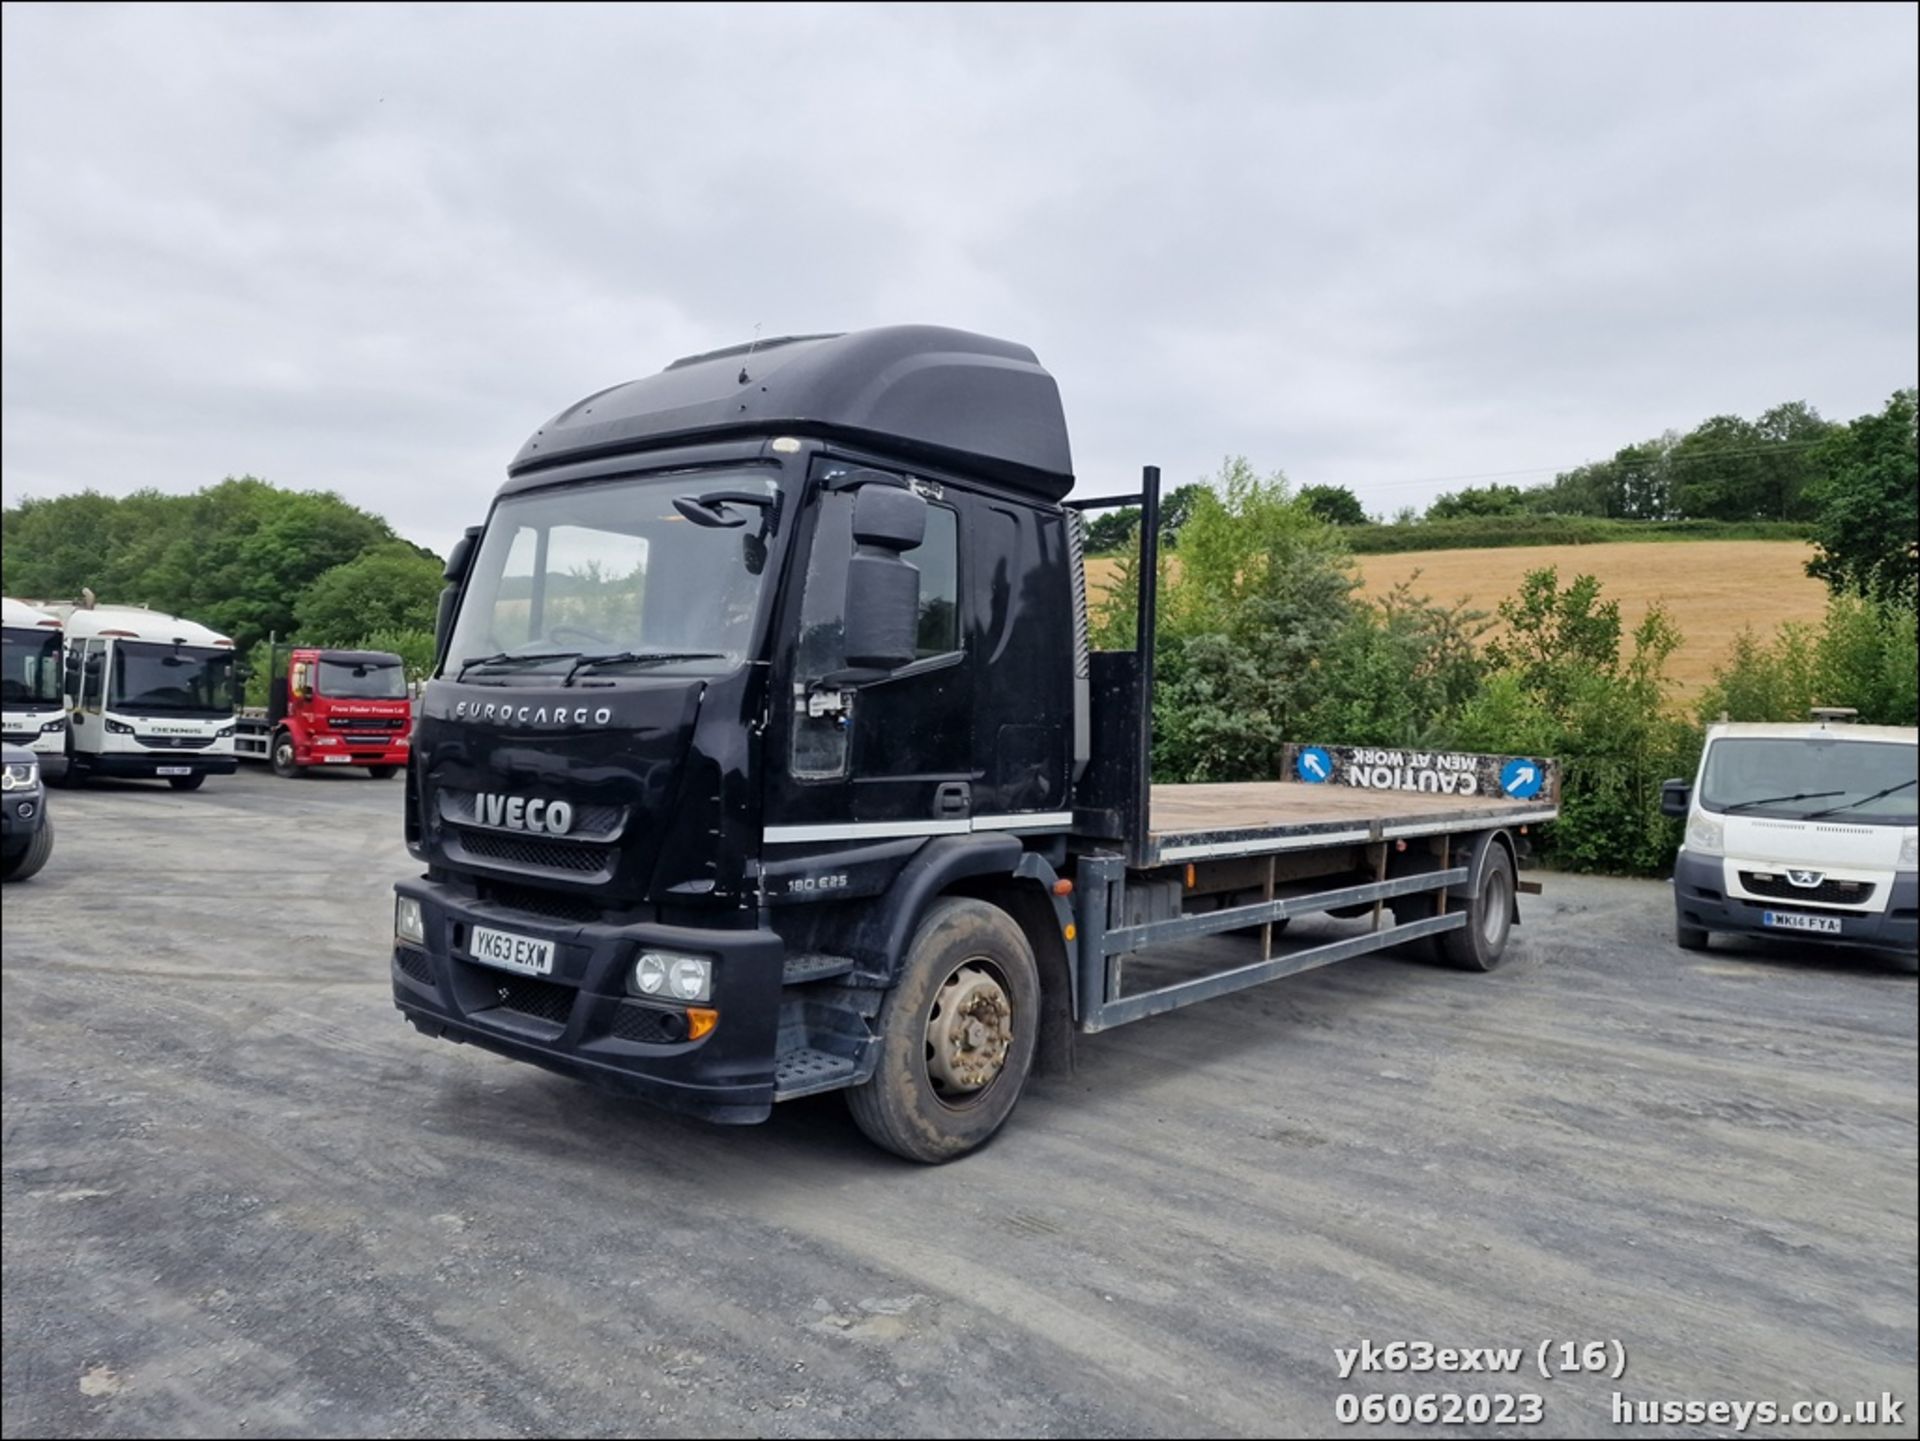 13/63 IVECO EUROCARGO (MY 2008) - 5880cc 2dr Flat Bed (Black) - Image 16 of 21